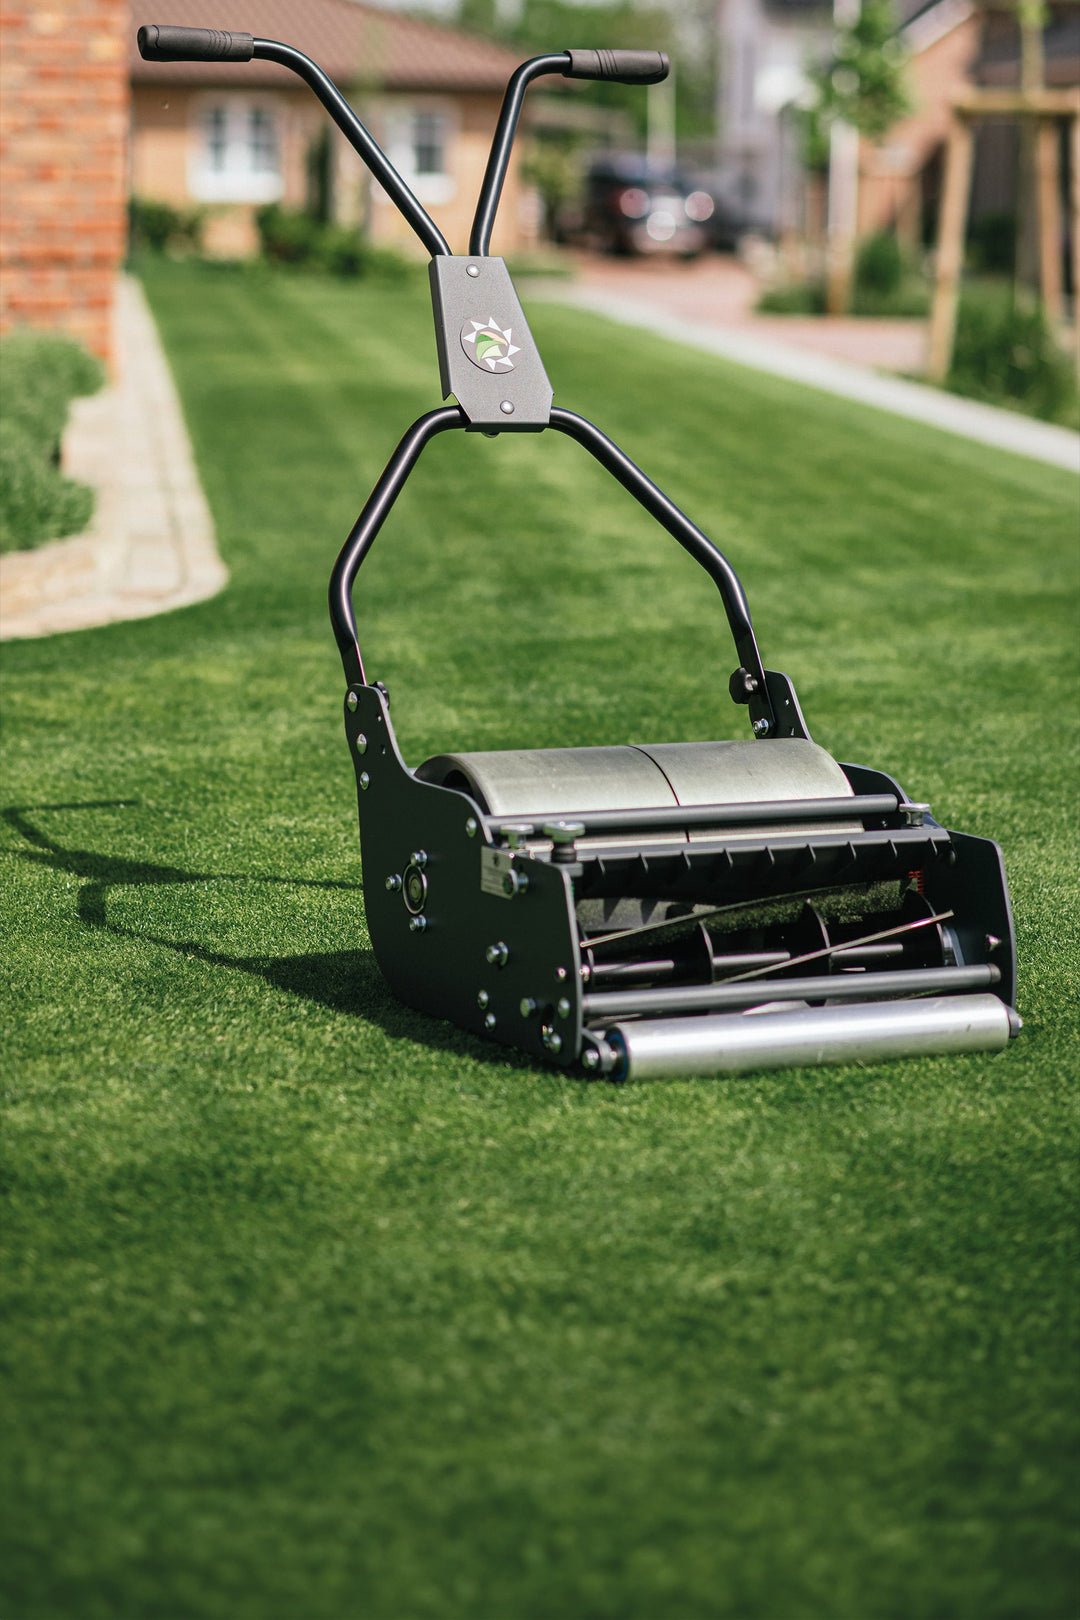 Lawn care: buy aerifier and drain the lawn effectively – Rasenspecht